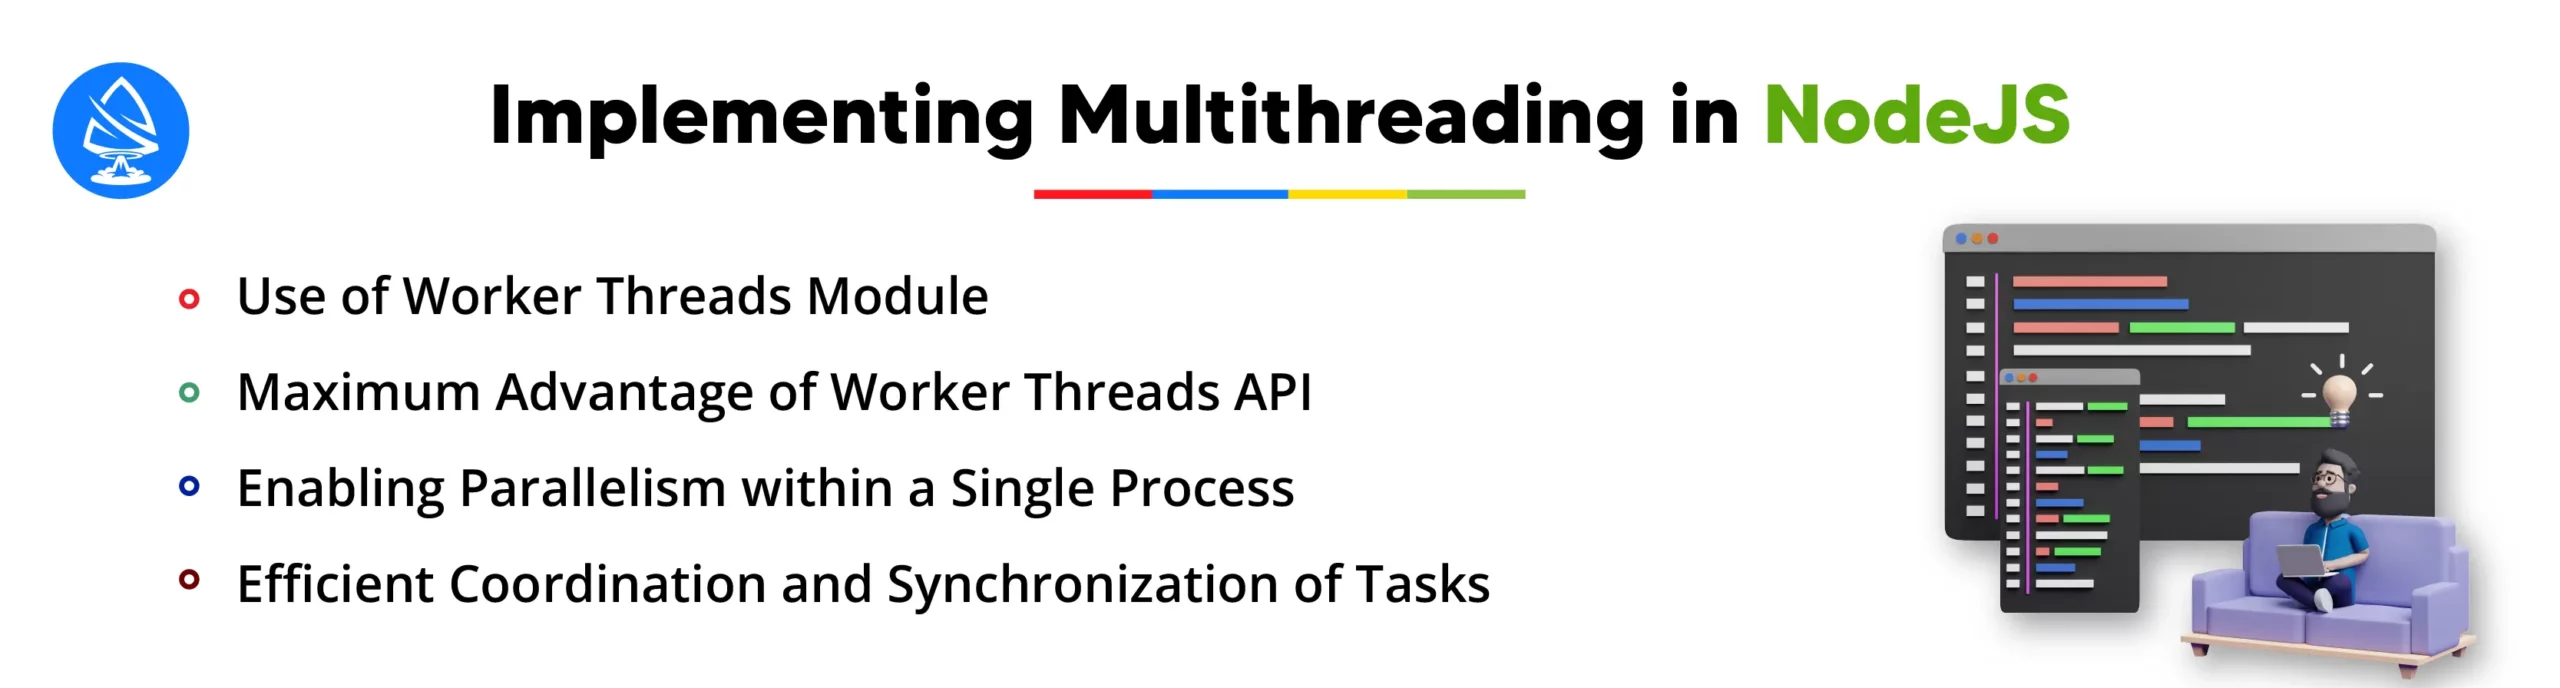 Implementing Multithreading in Node.JS 